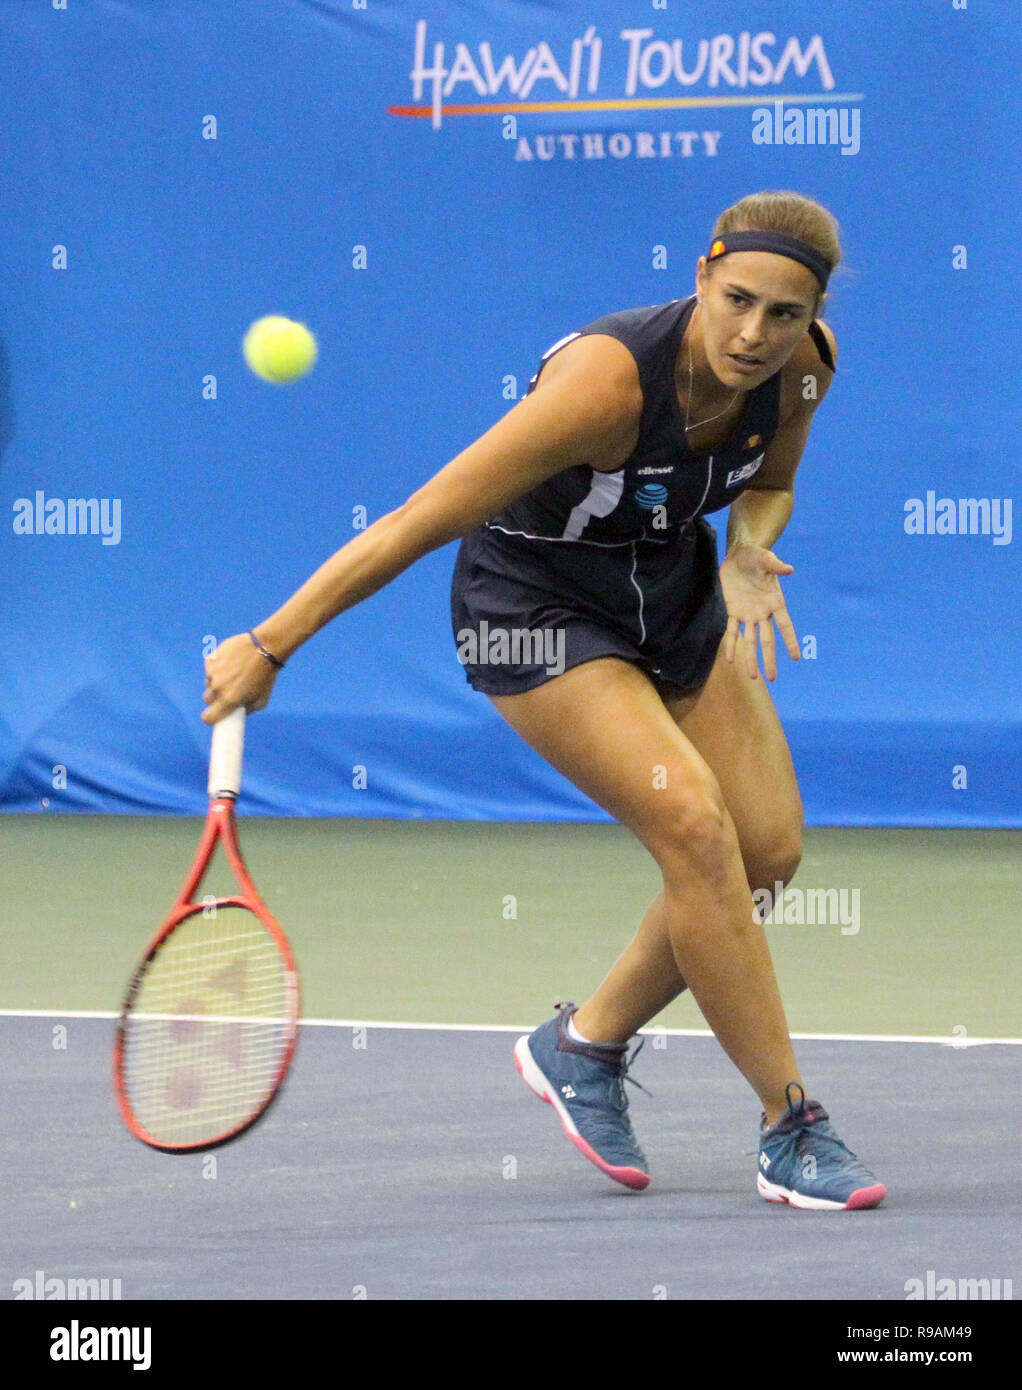 December 21, 2018 - Monica Puig volleys in a match against Christina McHale during the Hawaii Open at the Neal S. Blaisdell Center in Honolulu, Hawaii - Michael Sullivan/CSM Stock Photo